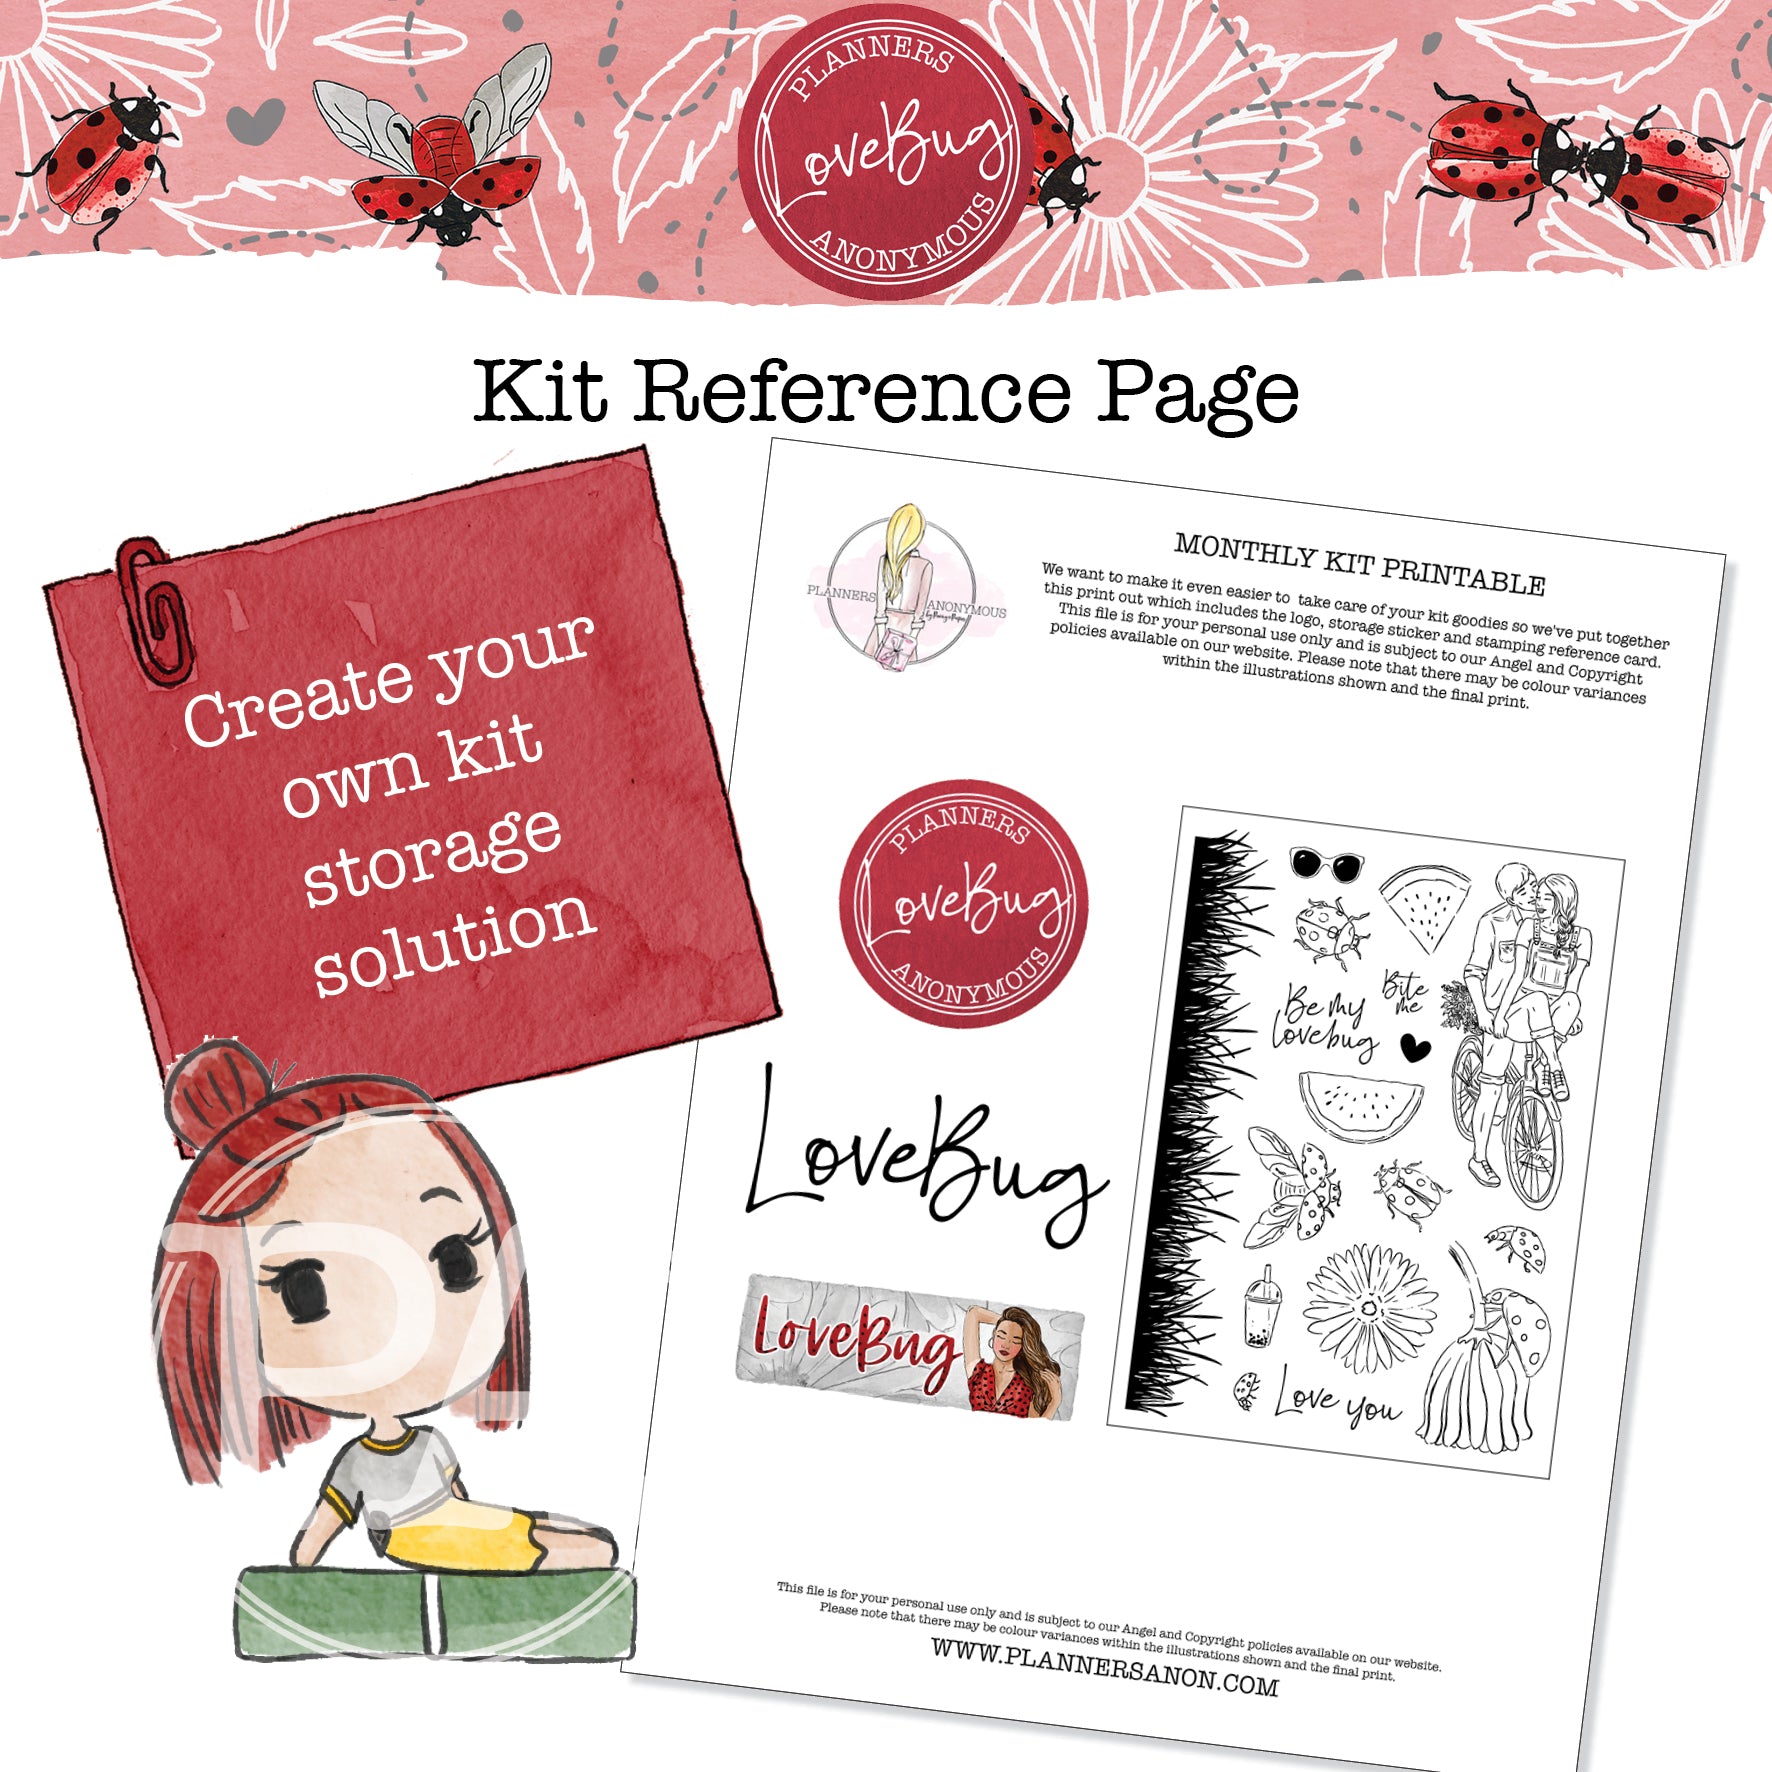 Love Bug Kit Reference Page